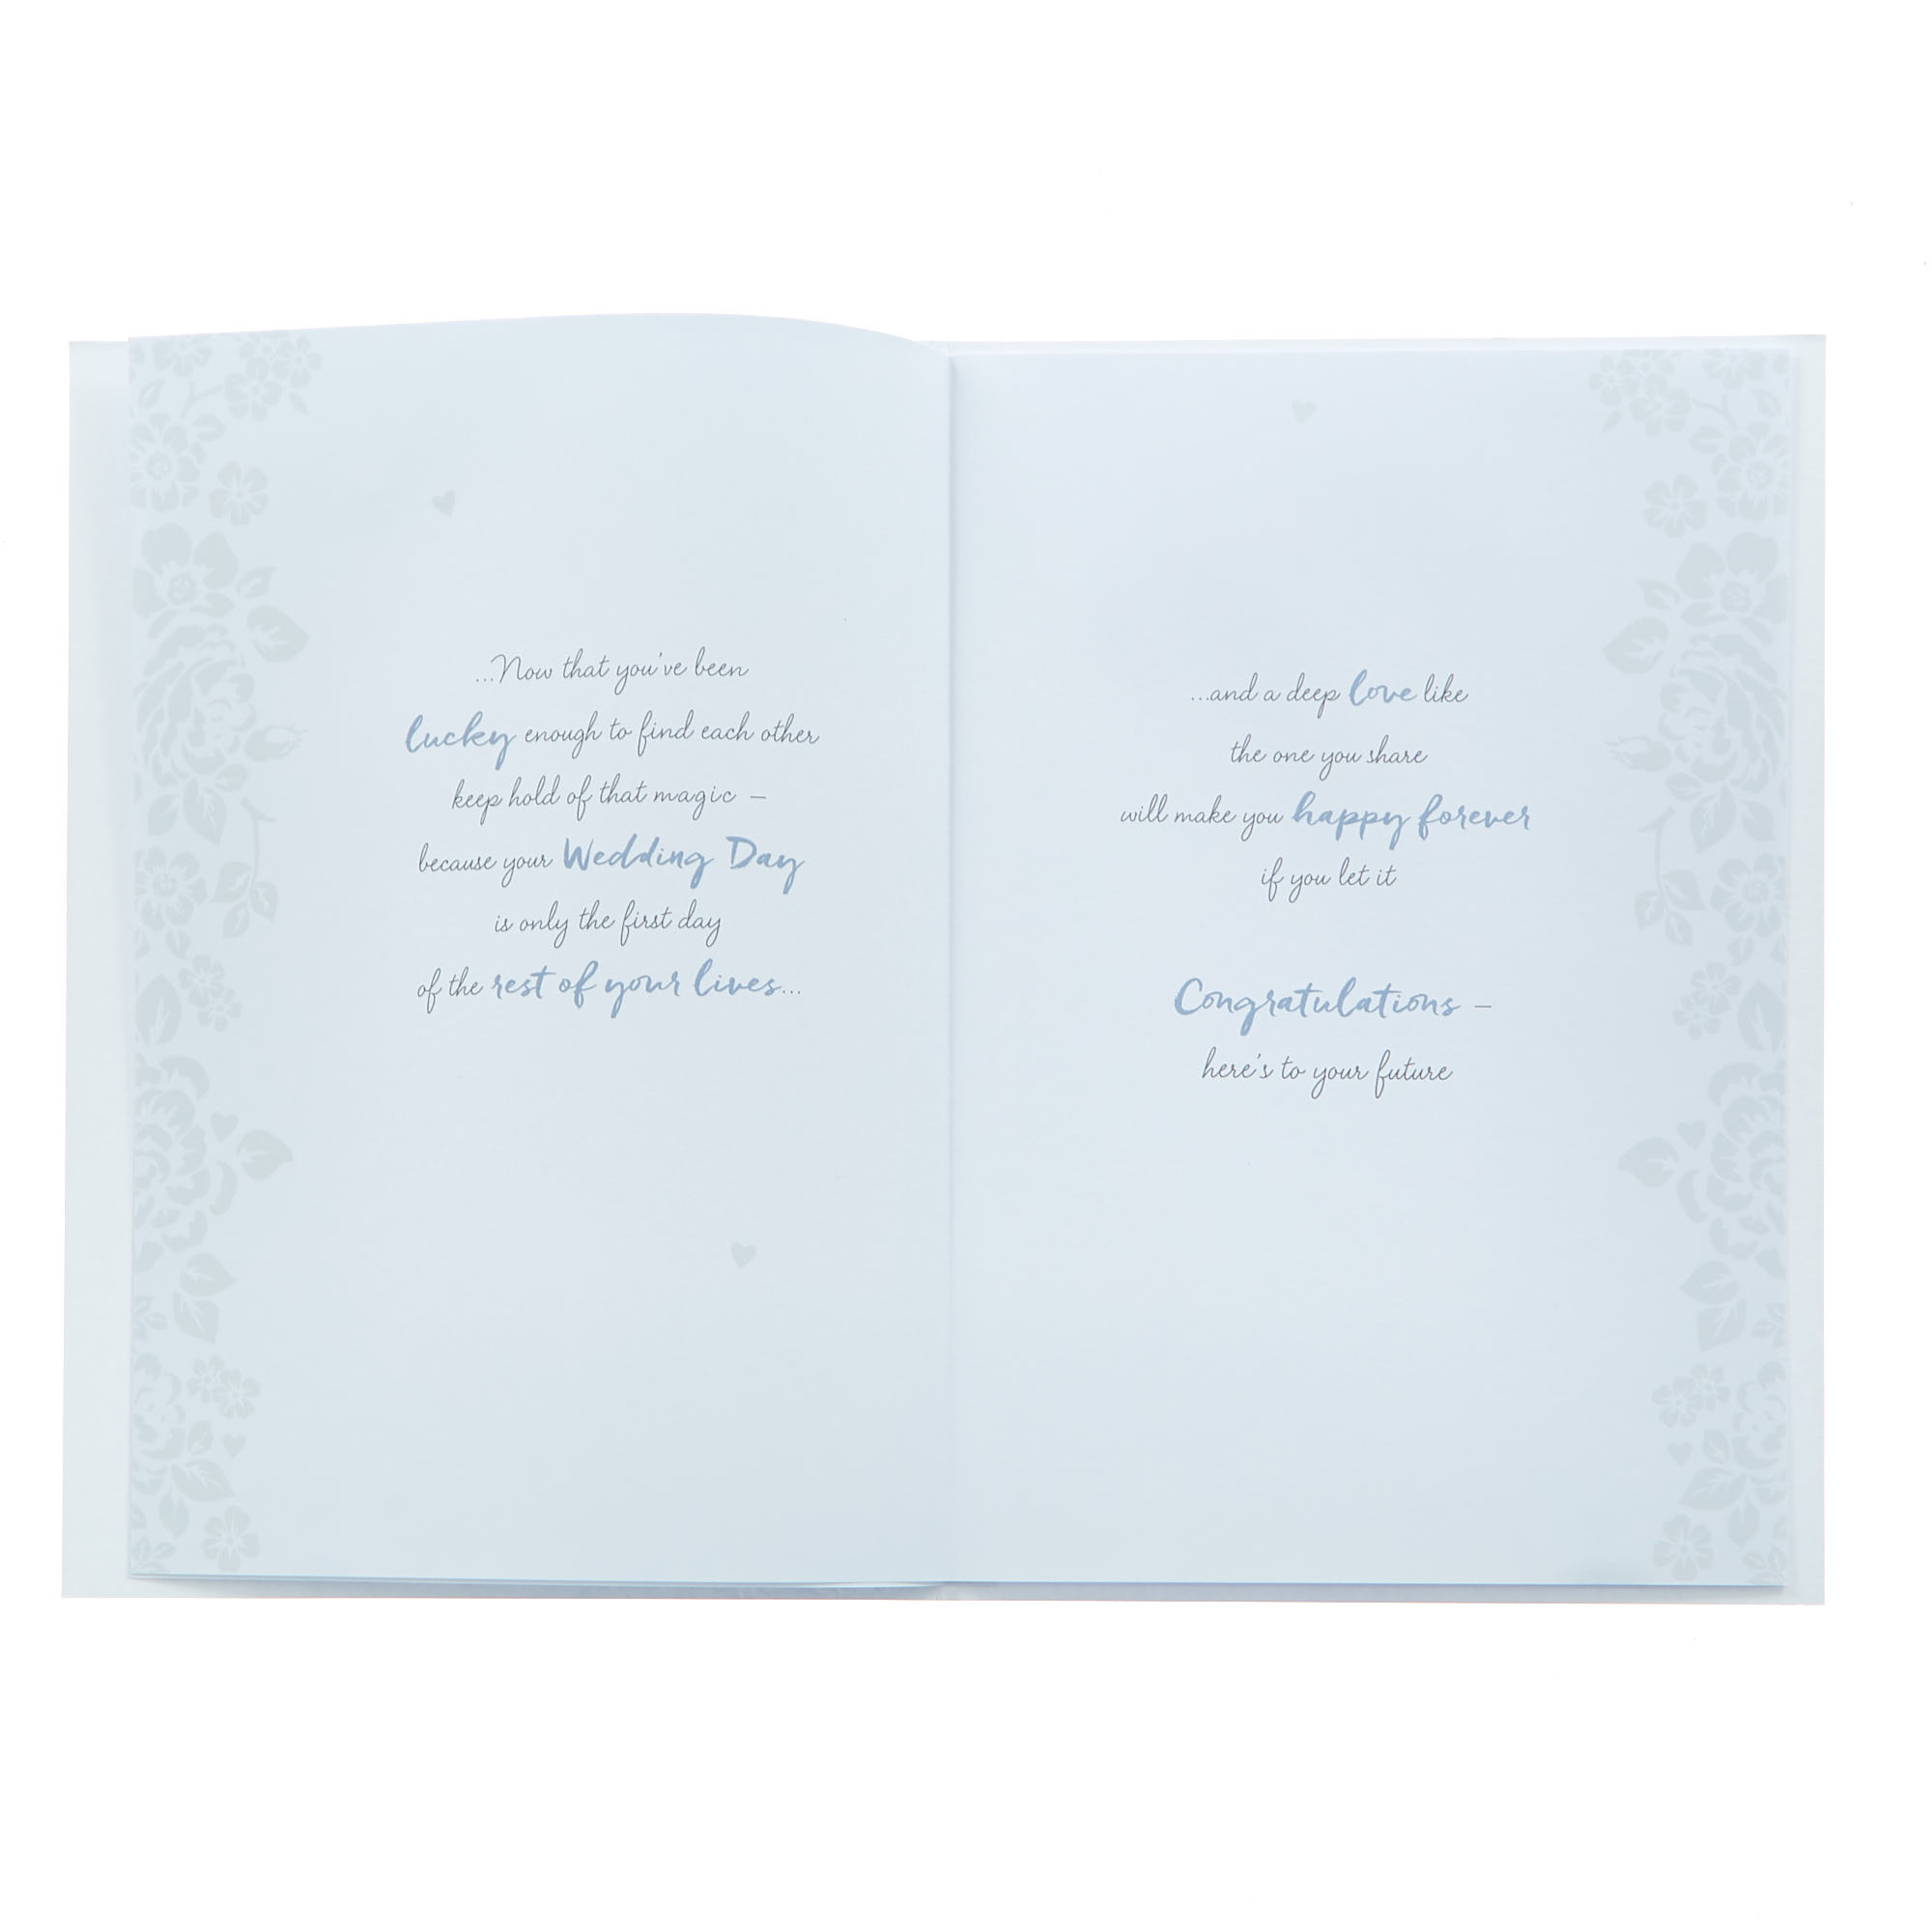 Wedding Card - For You Both, Seeing You Two Together...